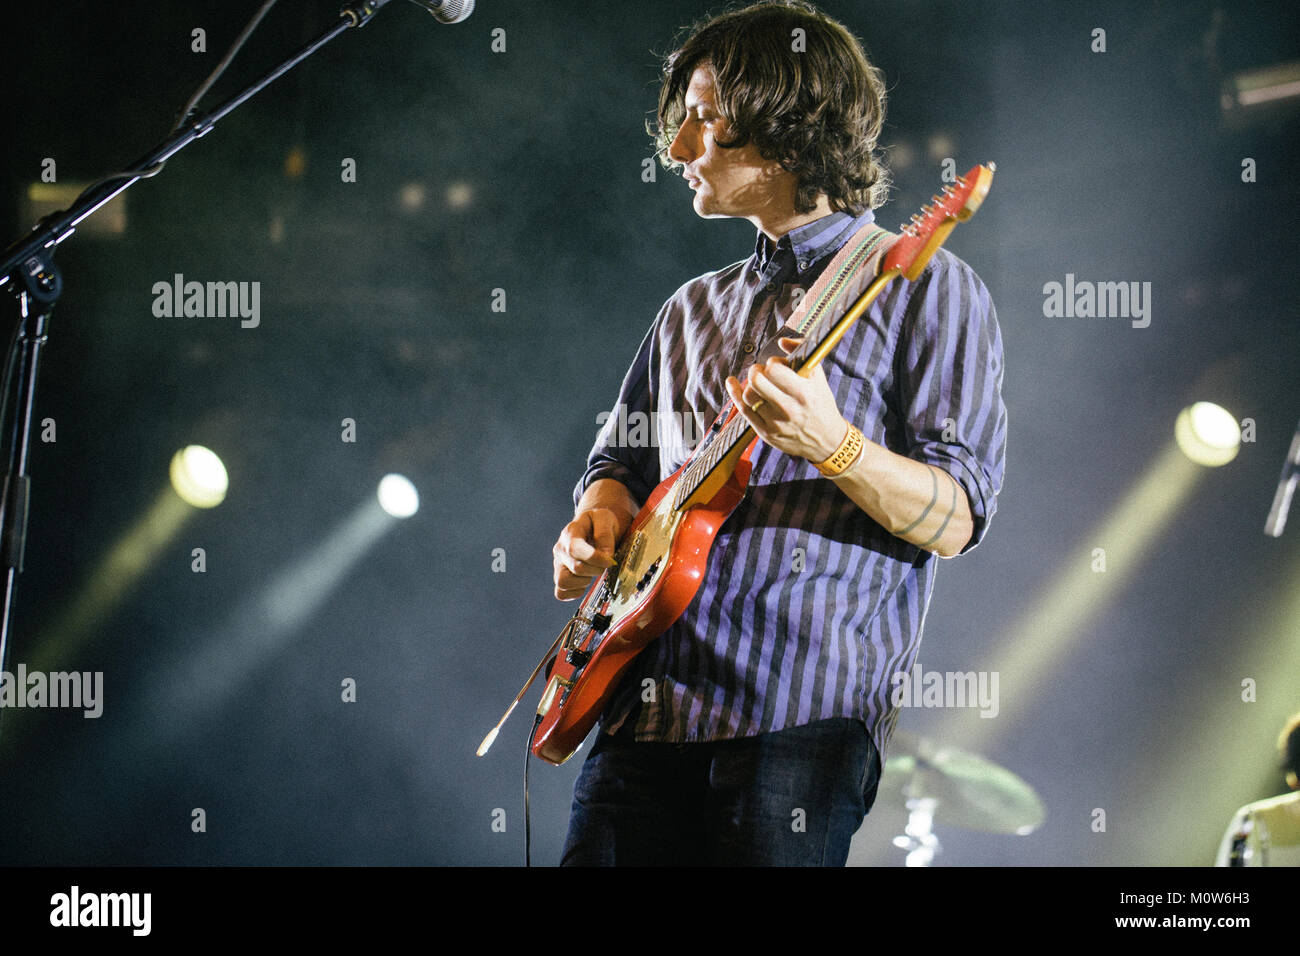 The American indie rock band Deerhunter performs a live concert at the Arena Stage at Roskilde Festival 2014. Here guitarist Lockett Pundt is pictured live on stage. Denmark 06.07.2014. Stock Photo